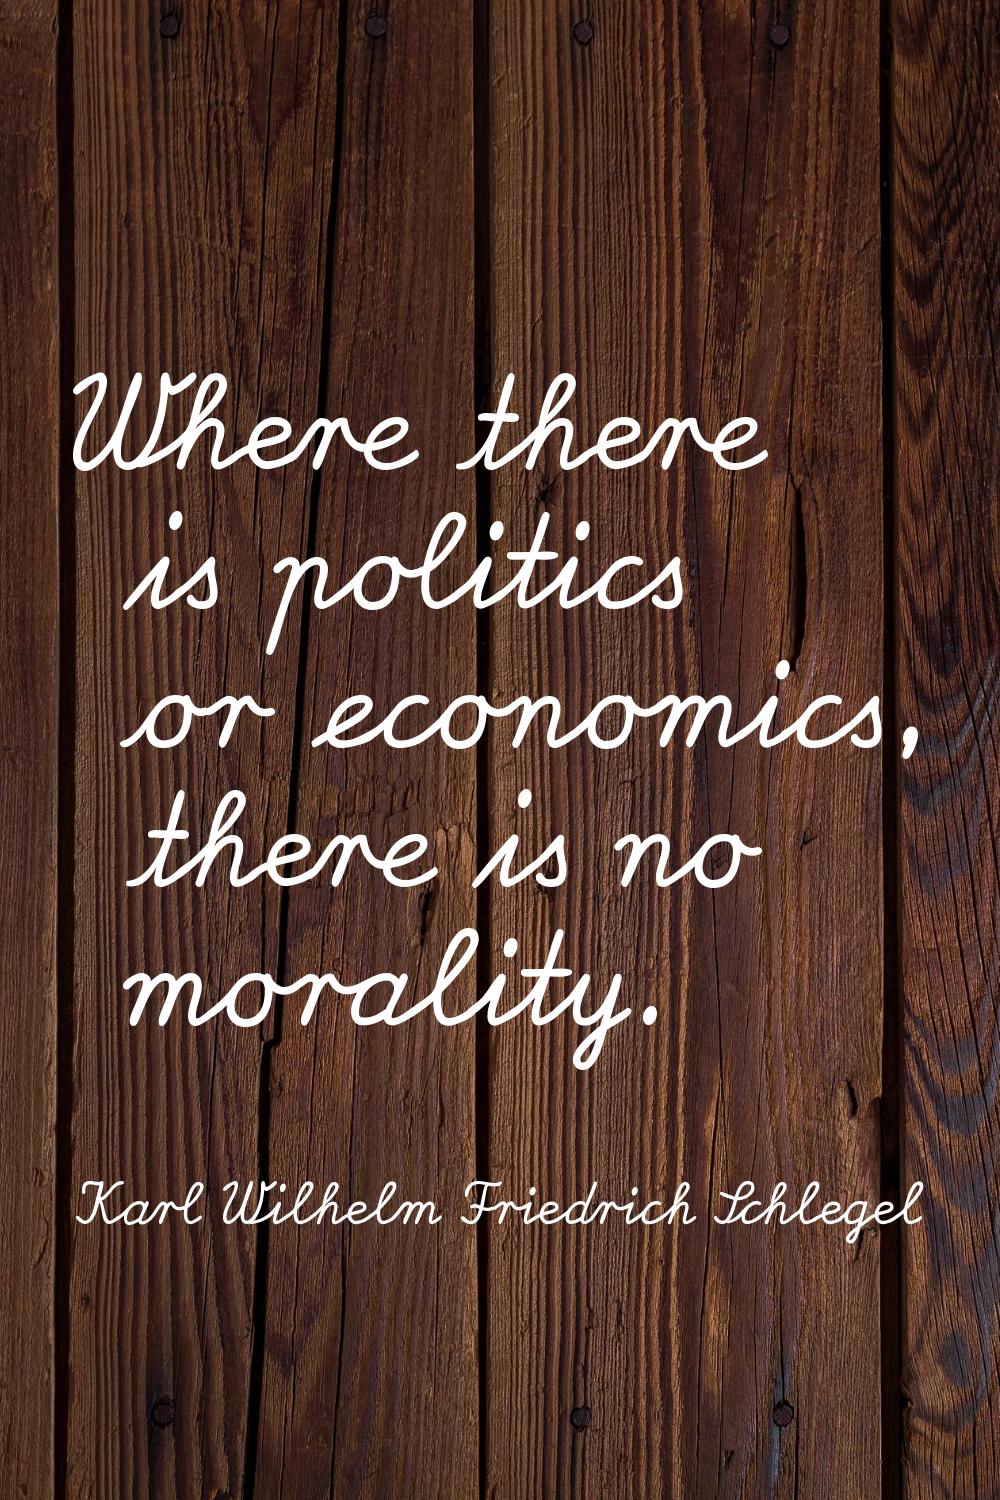 Where there is politics or economics, there is no morality.